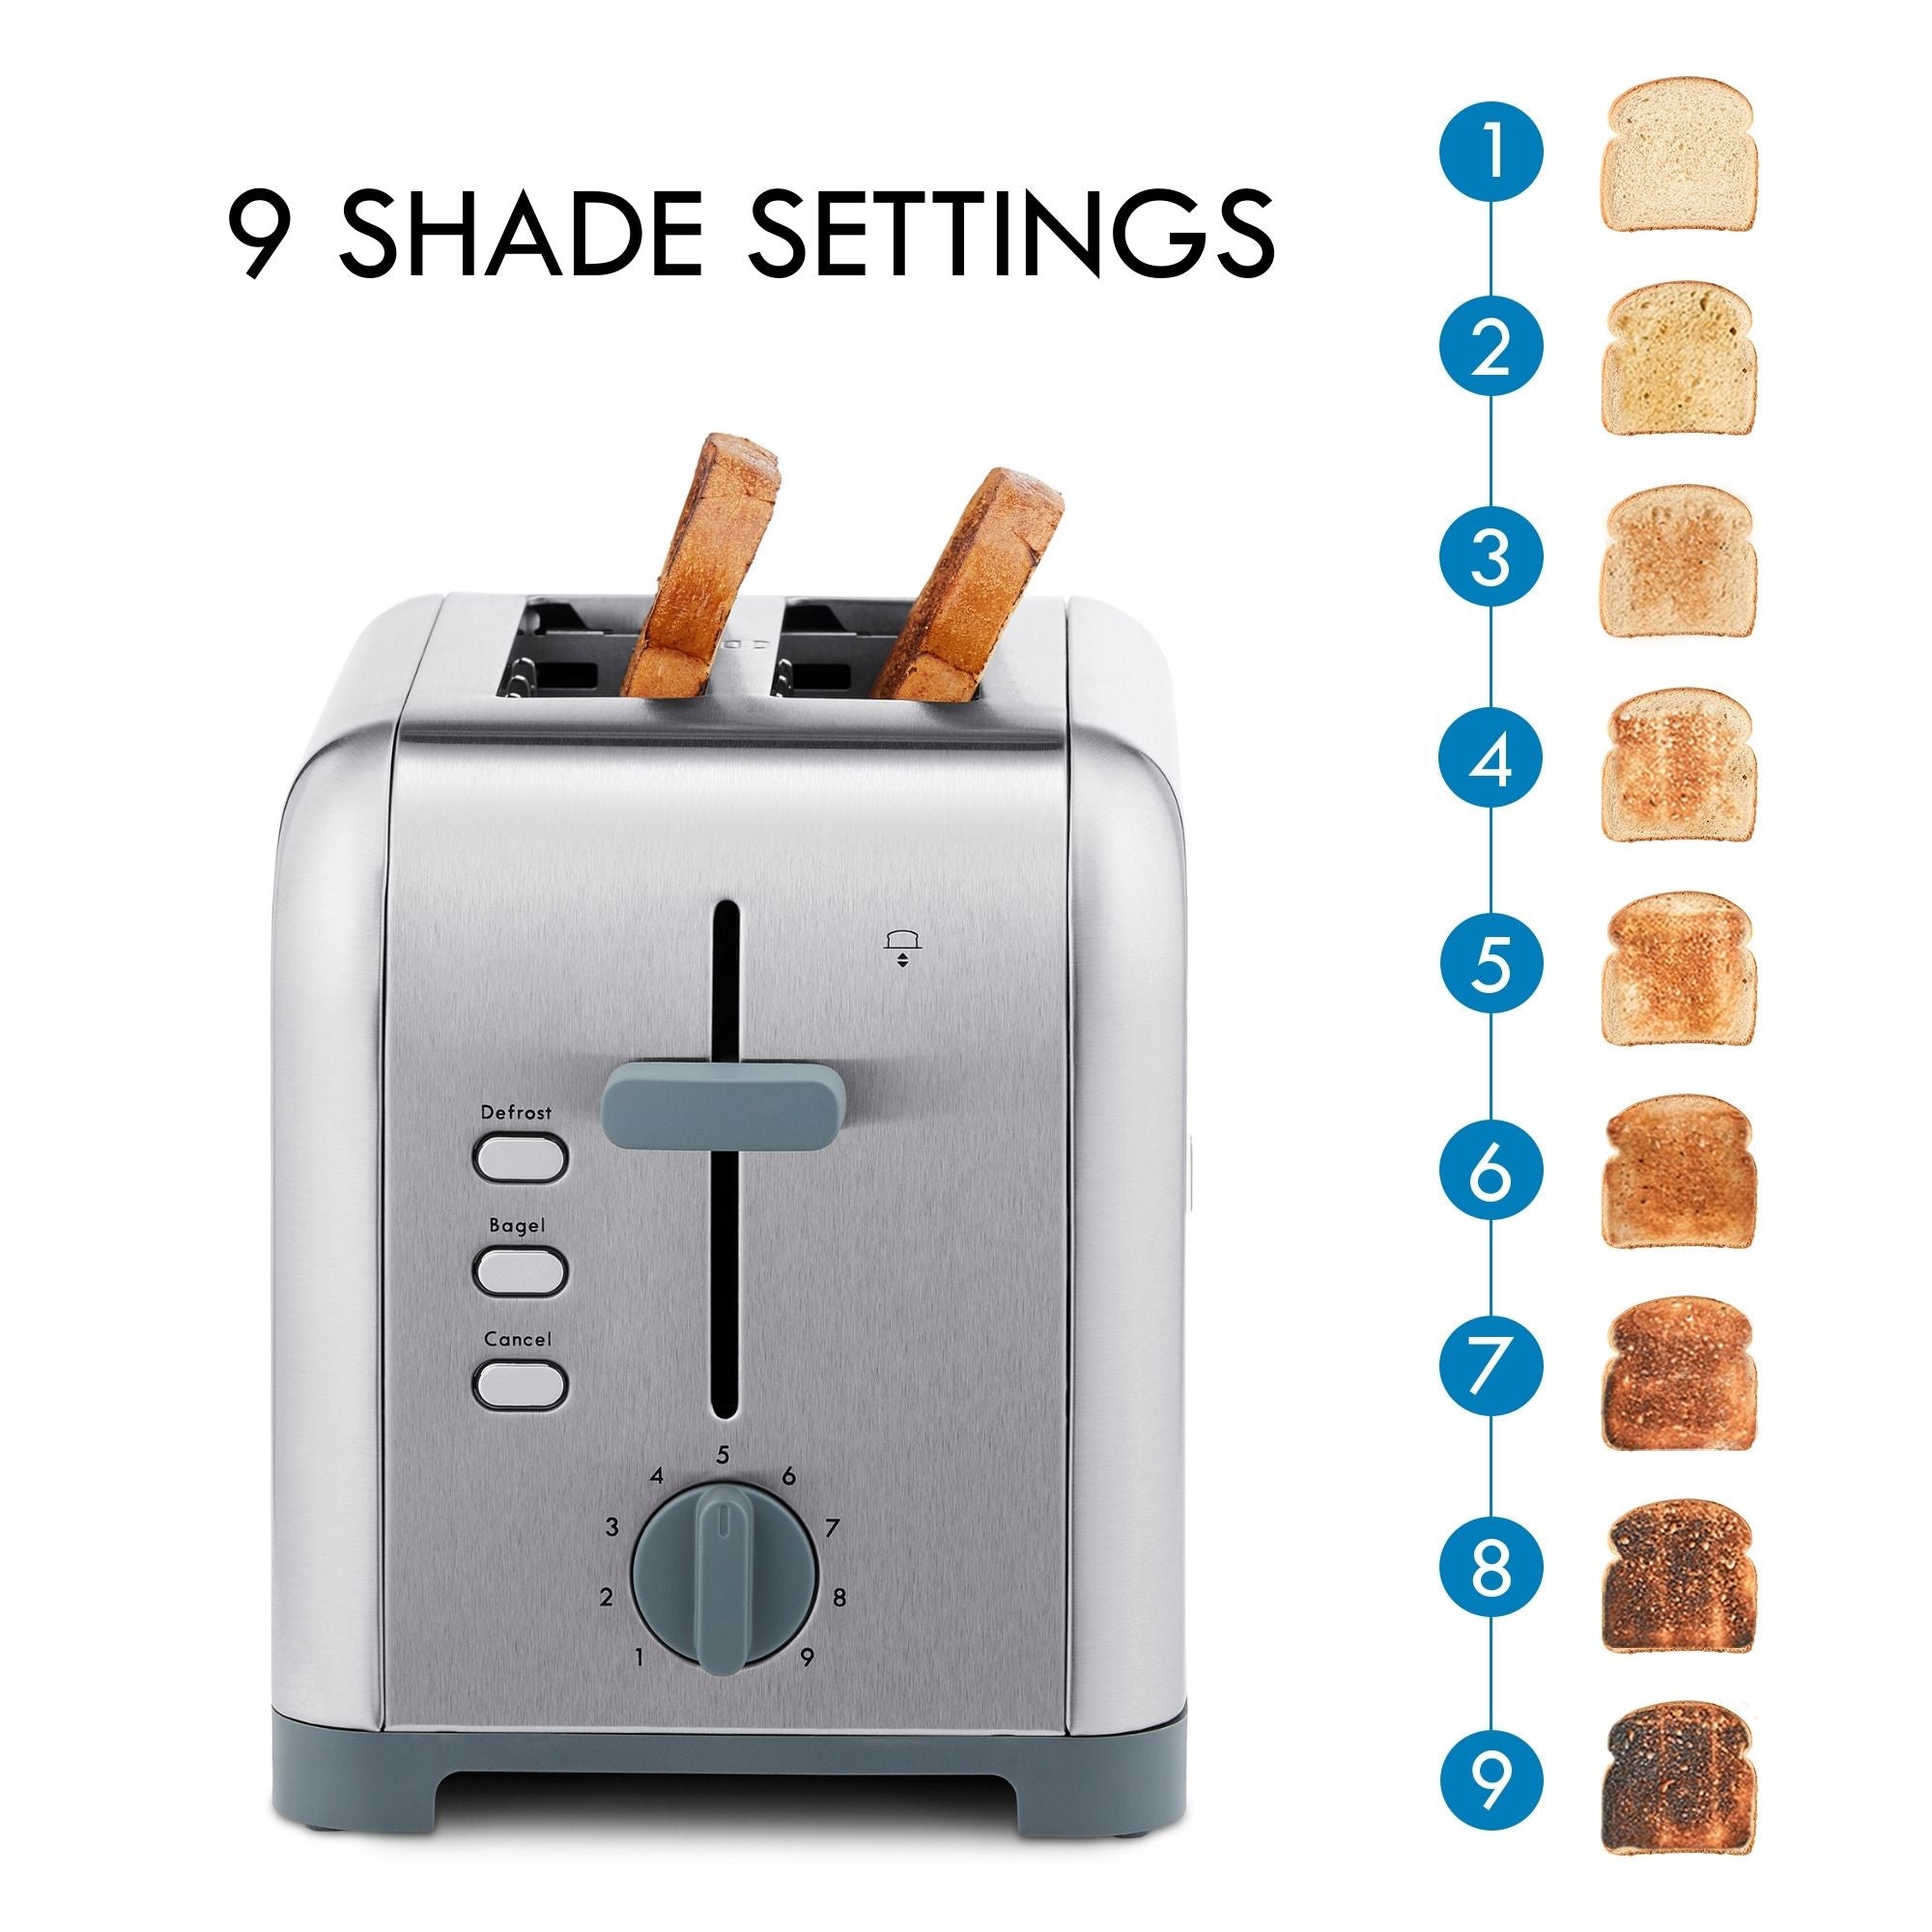 Kenmore 2-slice stainless steel toaster with two pieces of toast on the left with toast slices numbered 1-9 arranged vertically from lightest to darkest on the right. Text above reads, "9 shade settings"